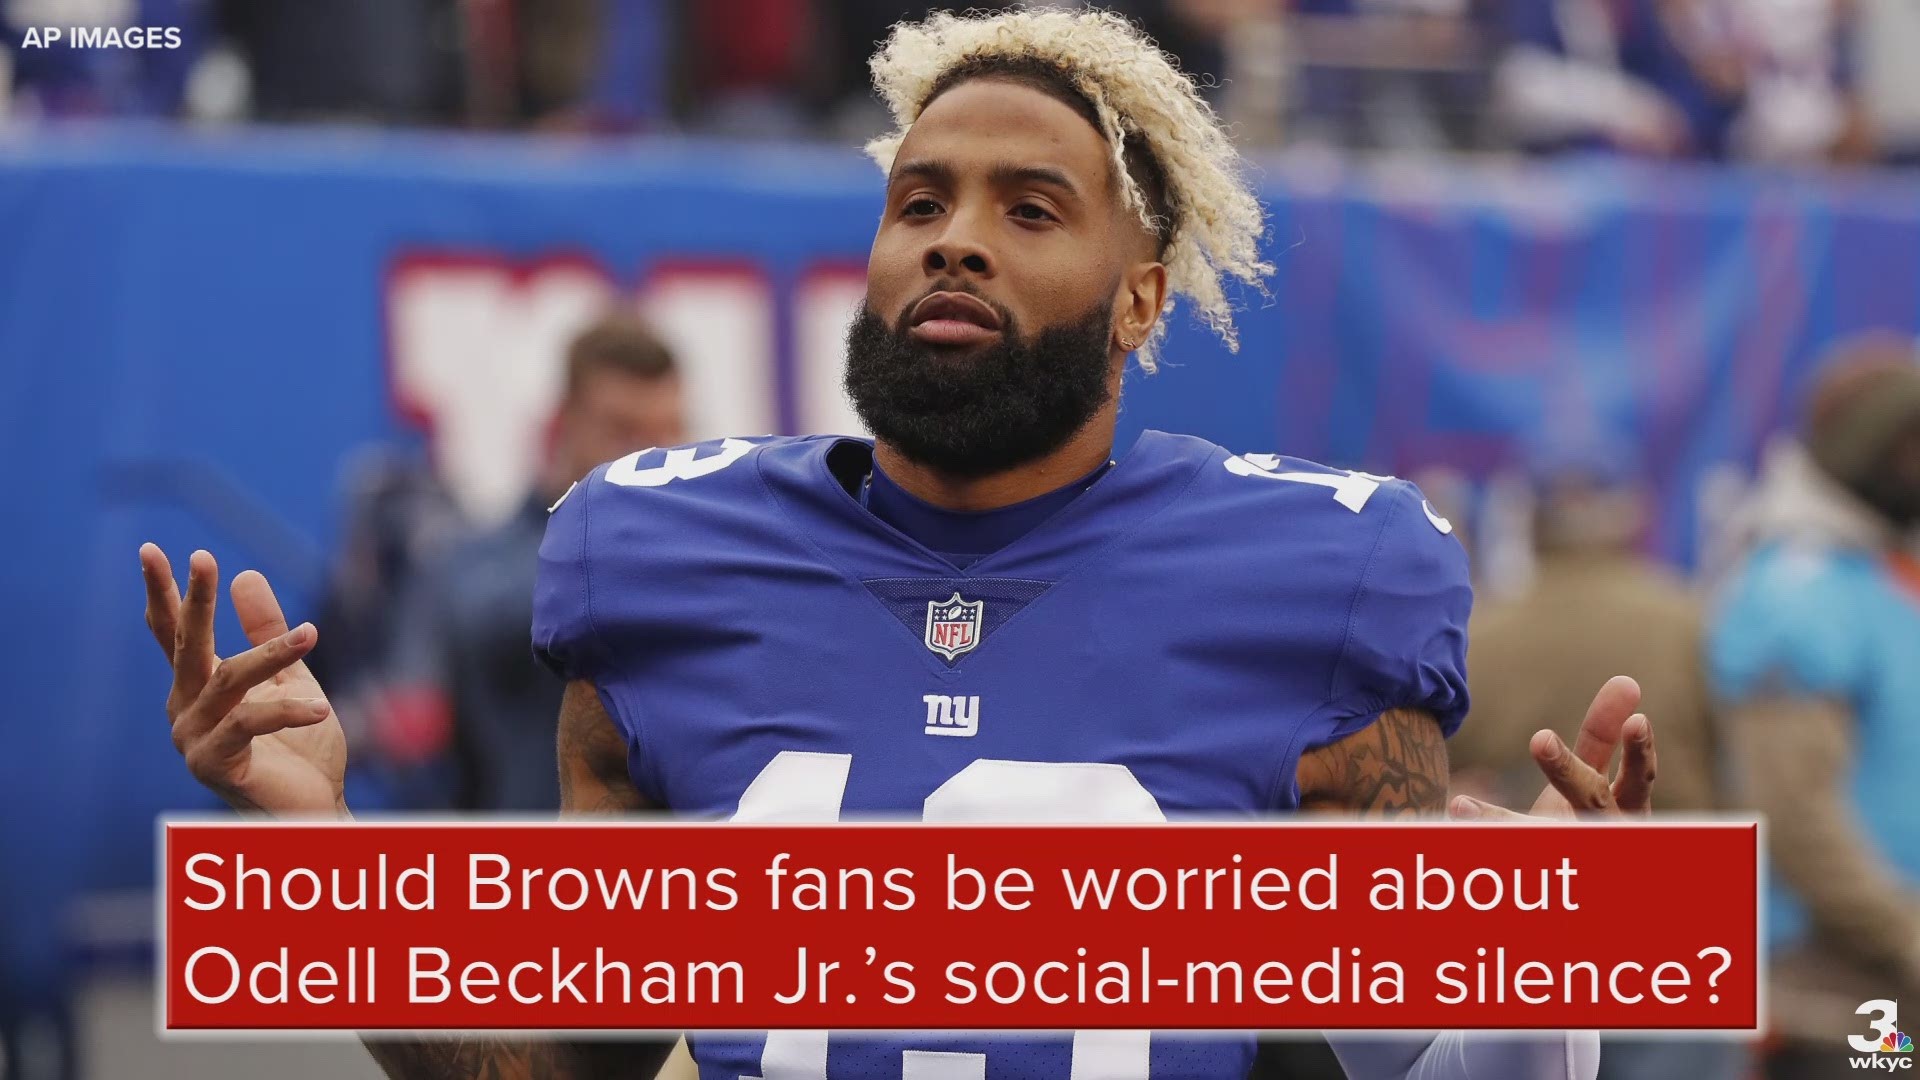 Should Odell Beckham Jr.'s social-media silence concern the Cleveland Browns and their fans?